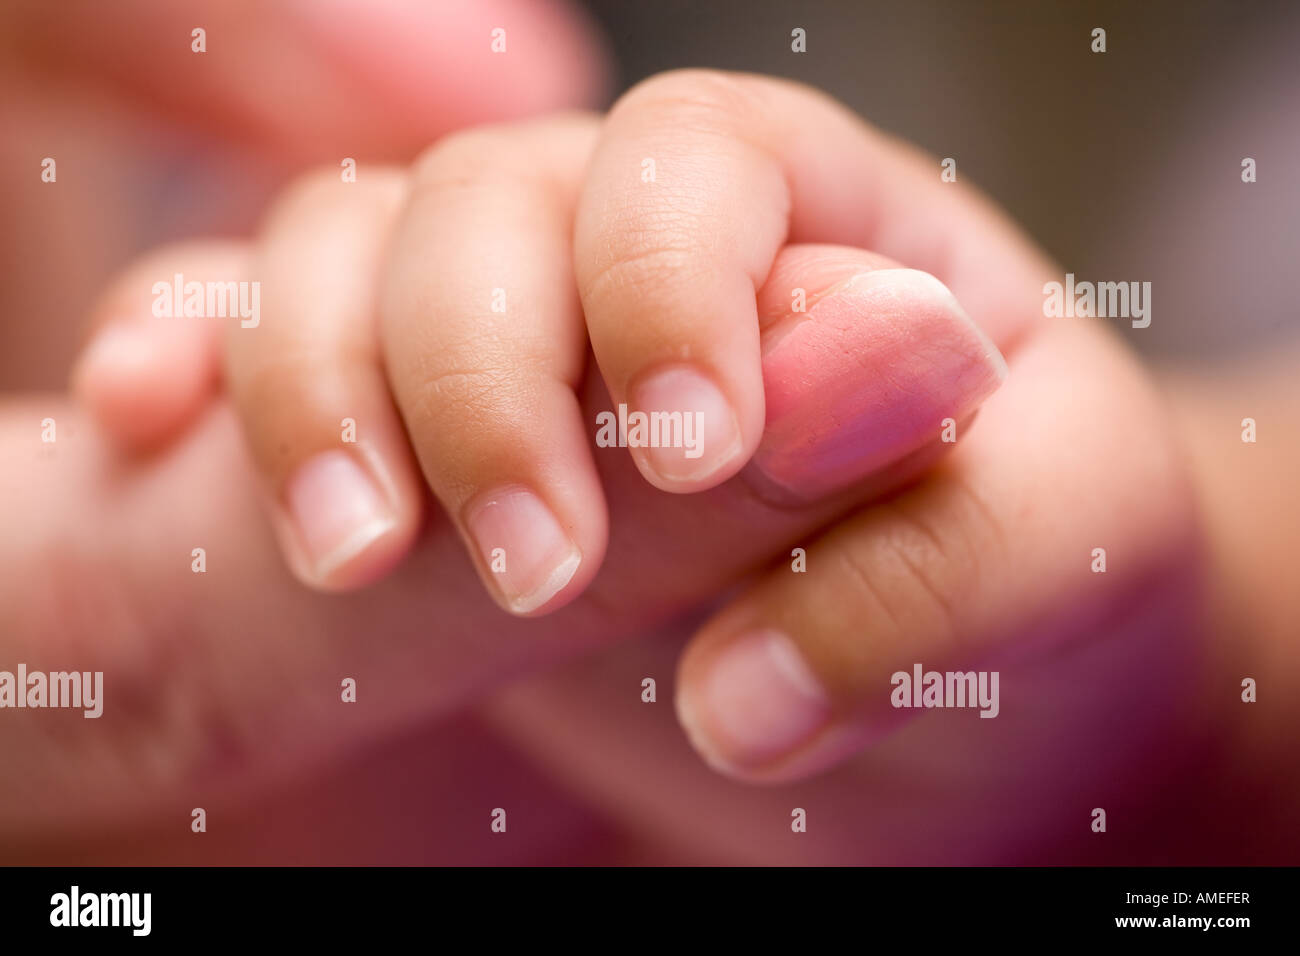 Tiny newborn baby fingers wrapped around adult female fingers up close Stock Photo